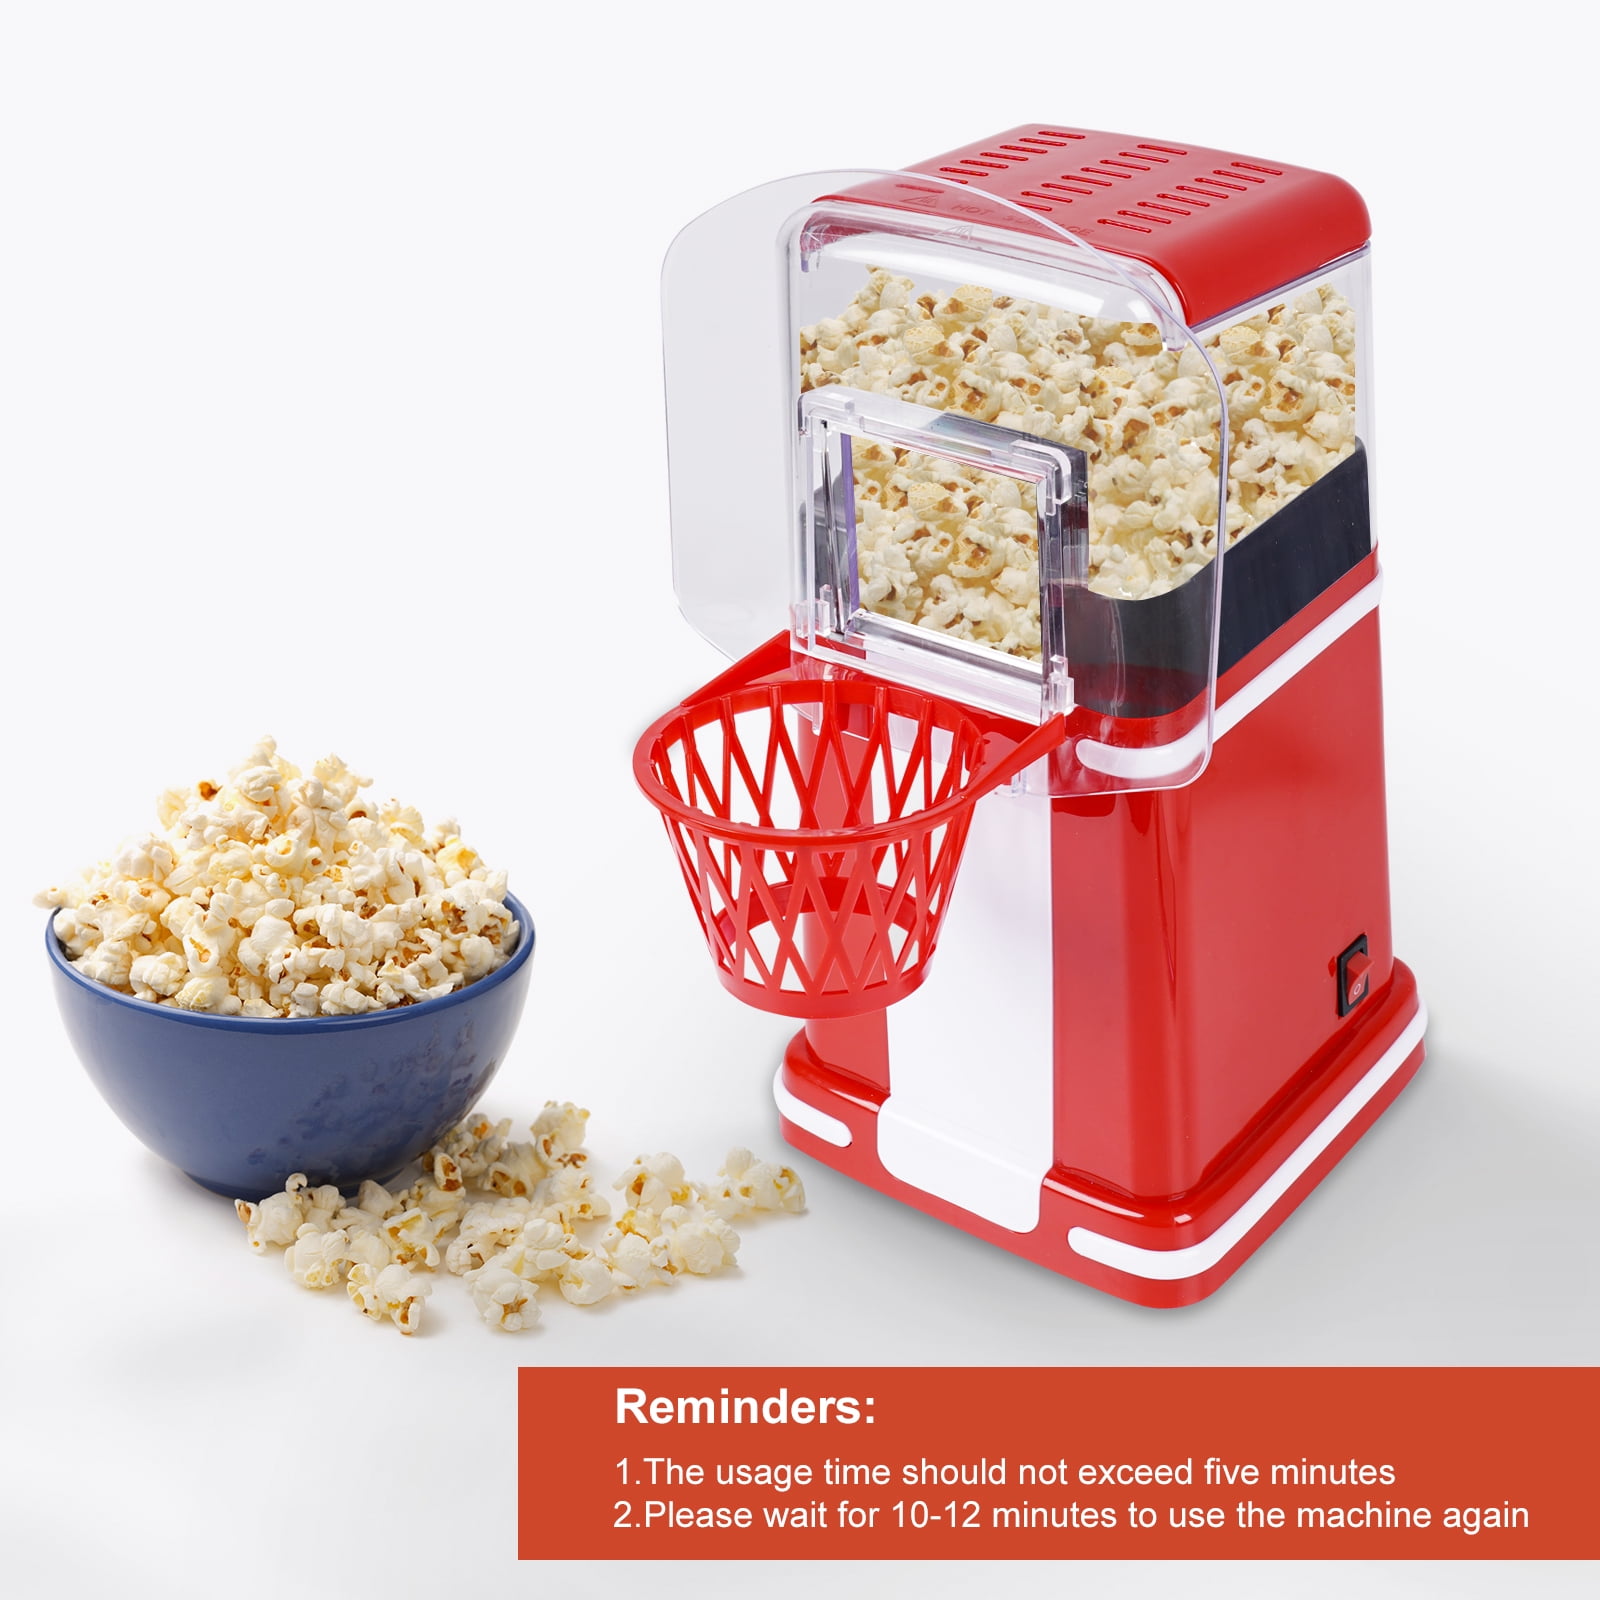 SANQ Popcorn Maker,Hot Air Popcorn Machine Vintage Tabletop Electric Popcorn  Popper, Healthy And Quick Snack For Home EU Plug